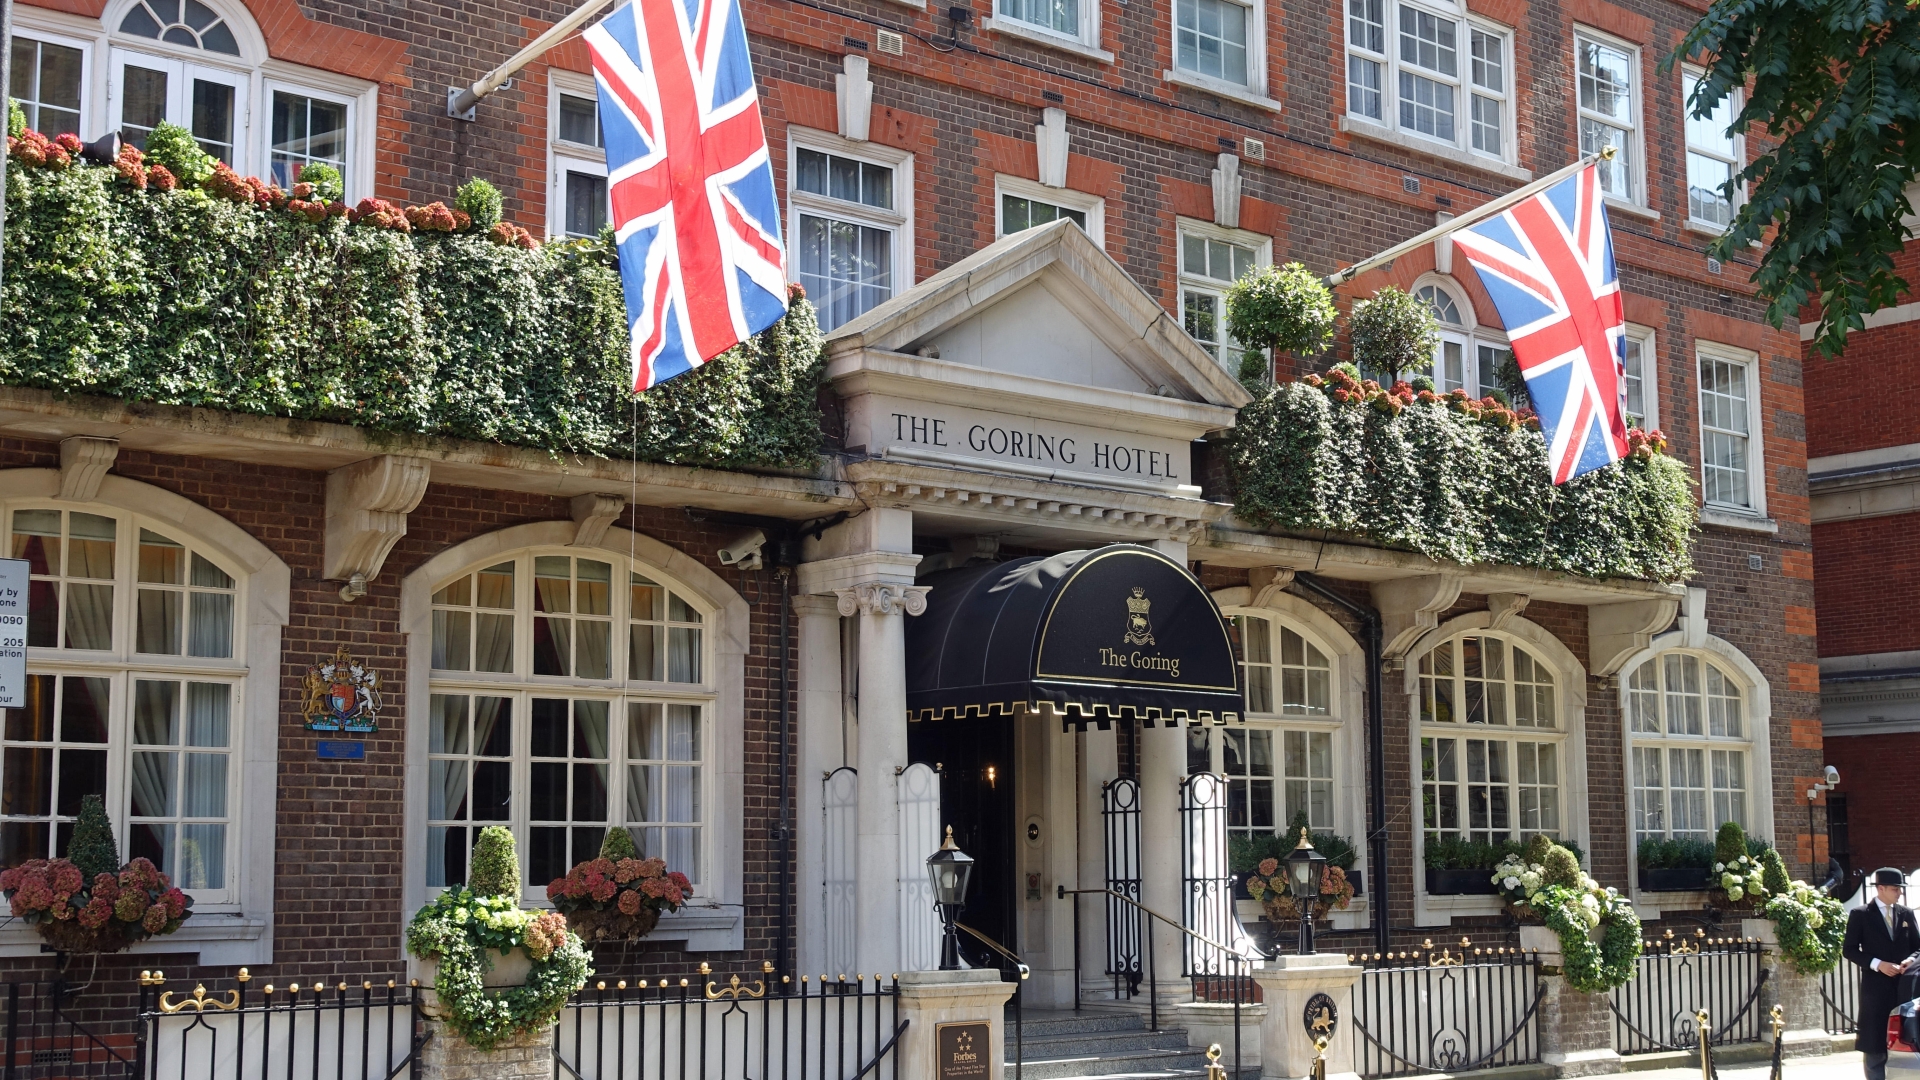 Inside the only hotel in the world with a Royal Warrant